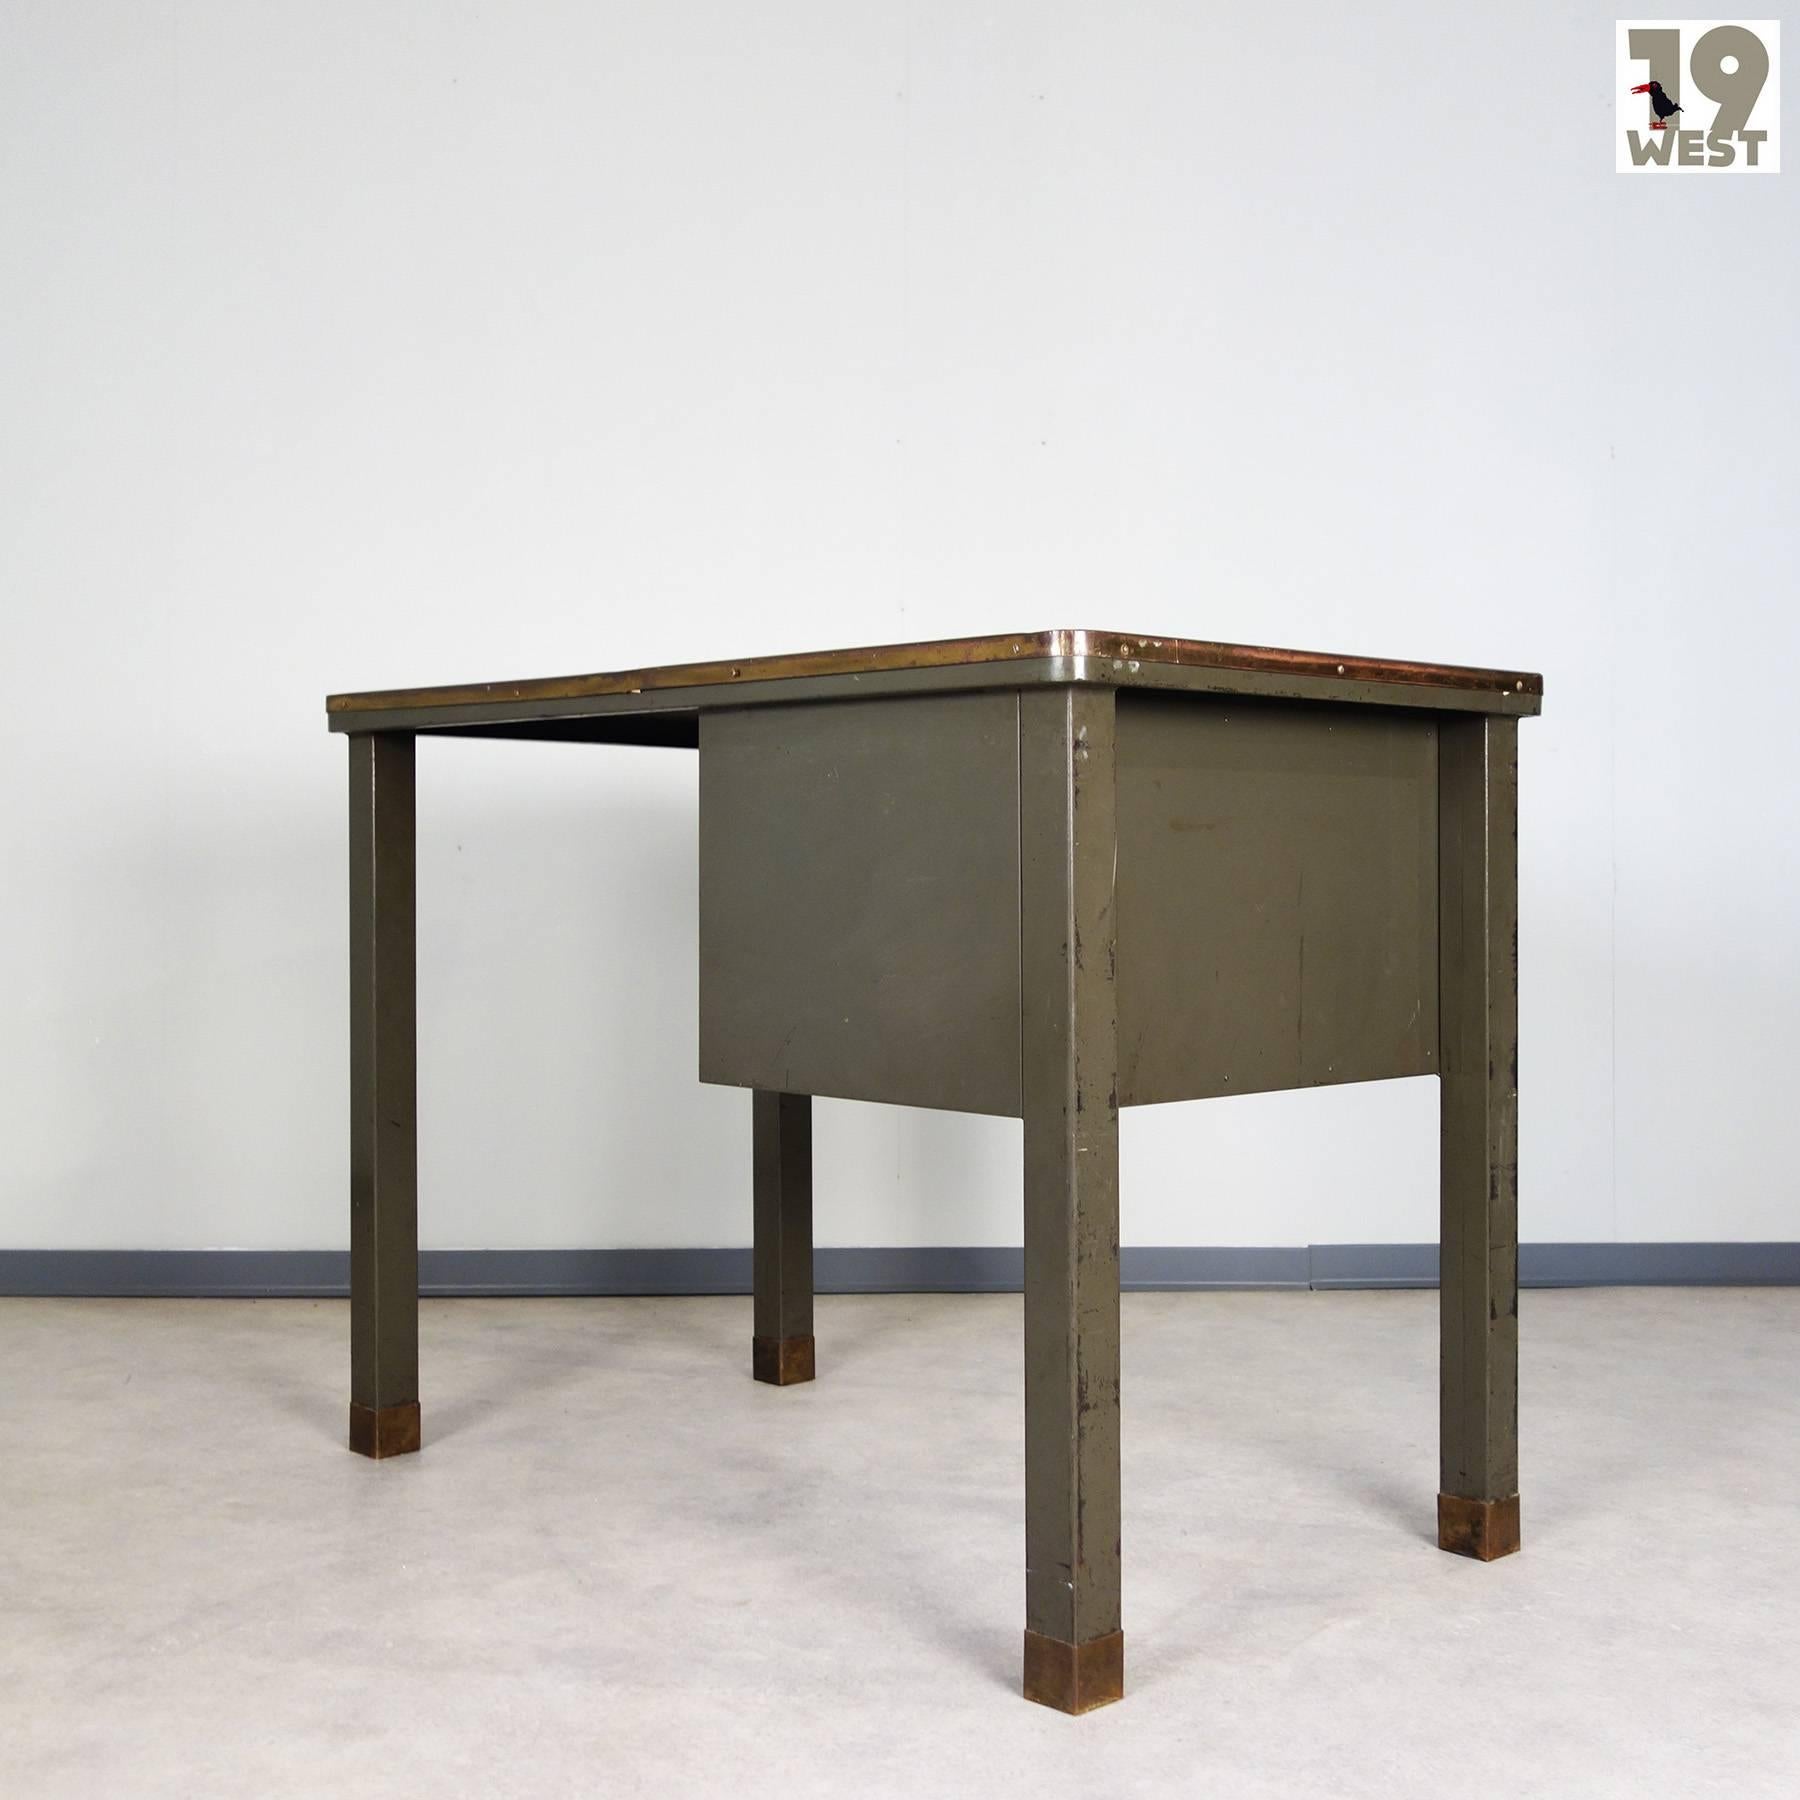 Belgian Metal Desk from the 1940s by Ribeauville Brussels For Sale